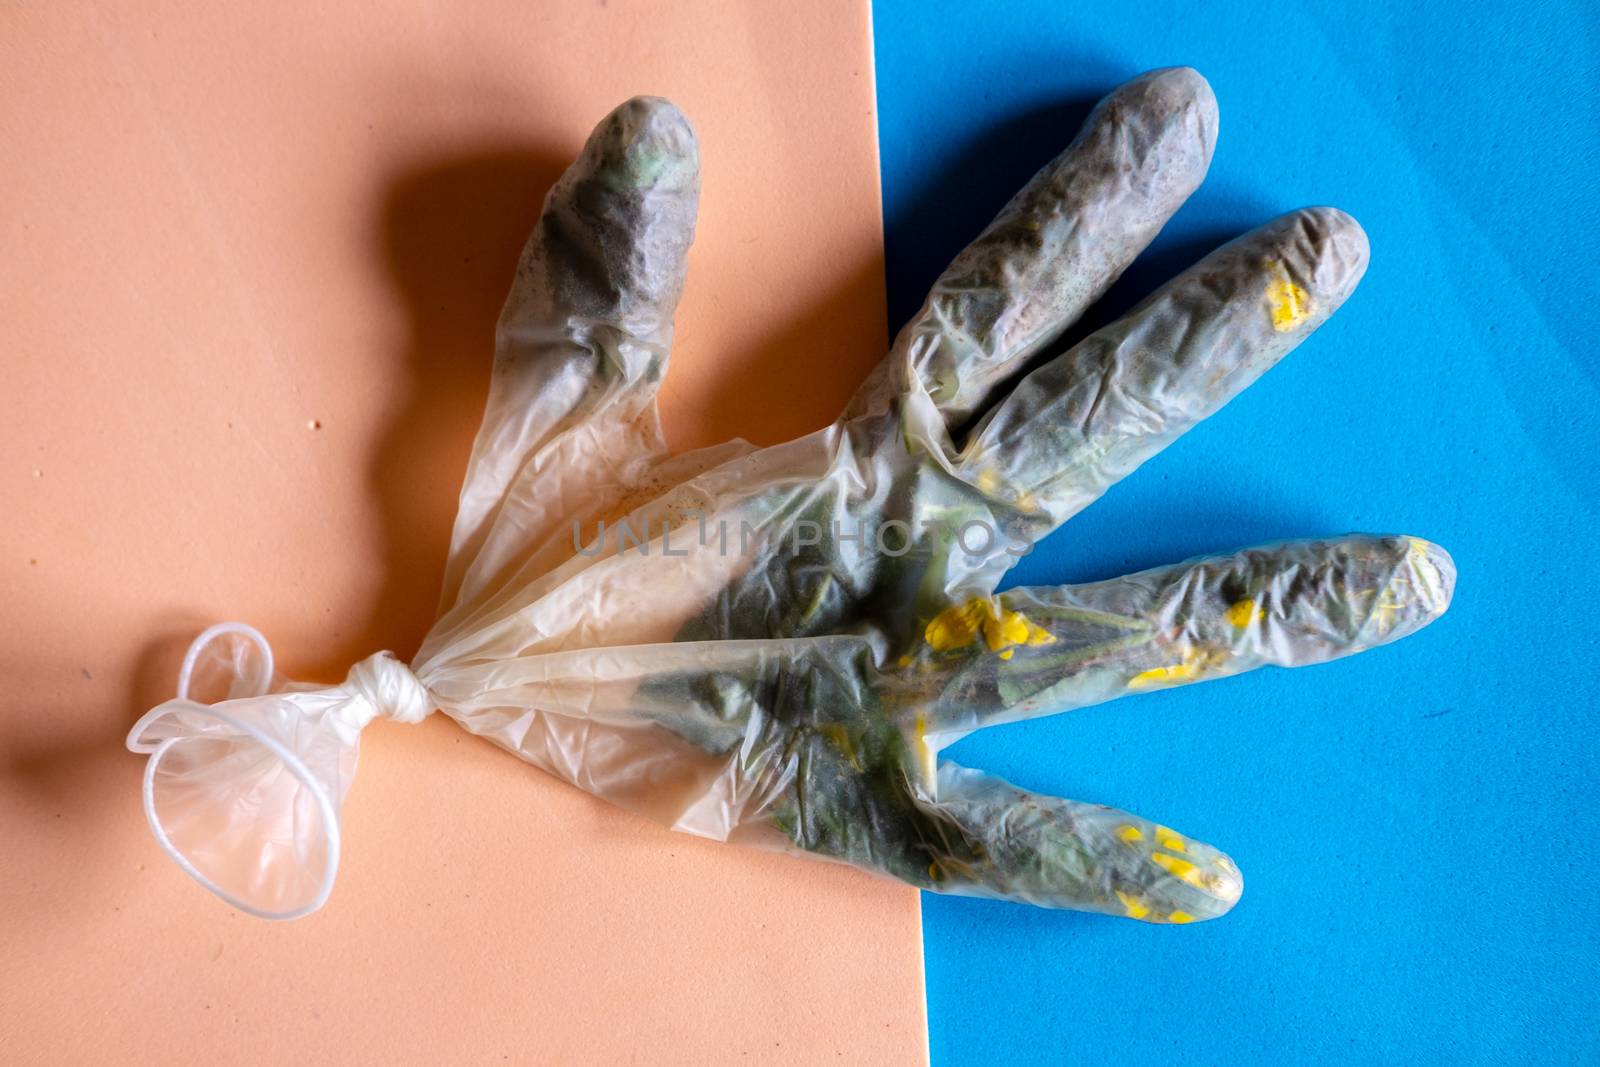 Blades of grass and yellow flowers inside a medical glove as a symbol of fighting coronavirus by mikelju